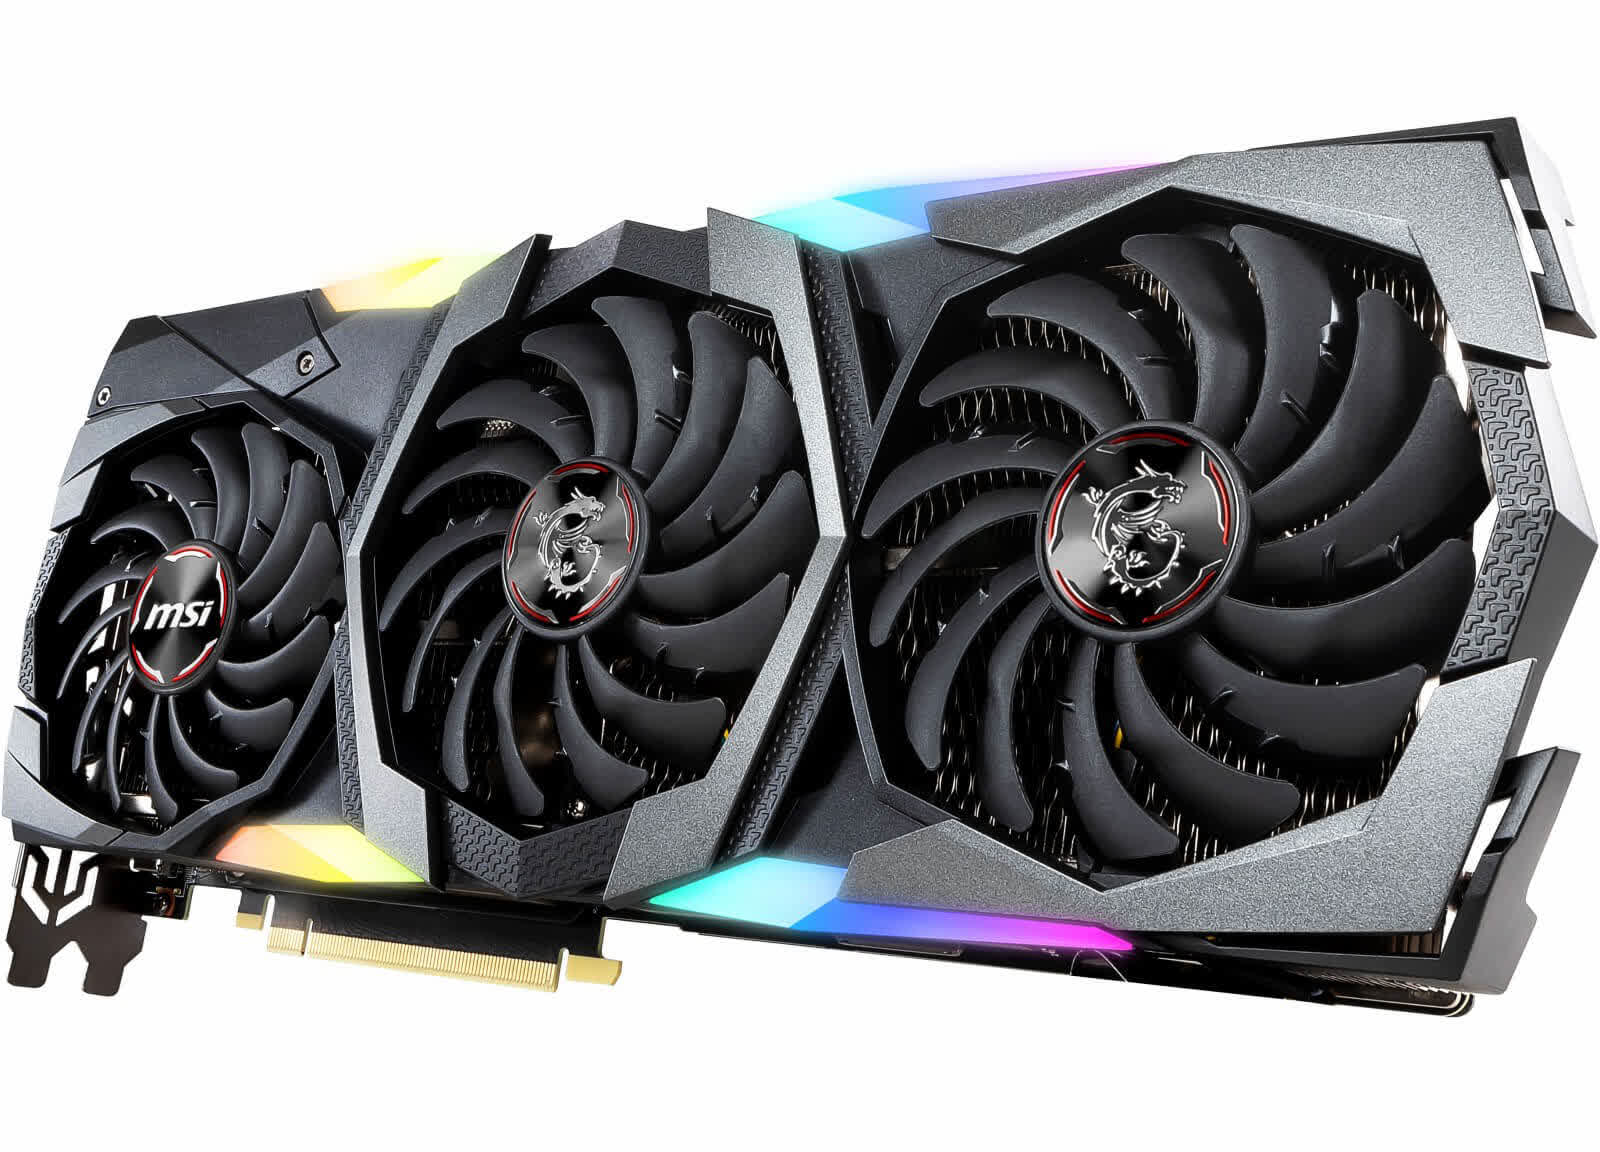 MSI GeForce RTX 2070 Super Gaming X Trio Reviews, Pros and Cons | TechSpot